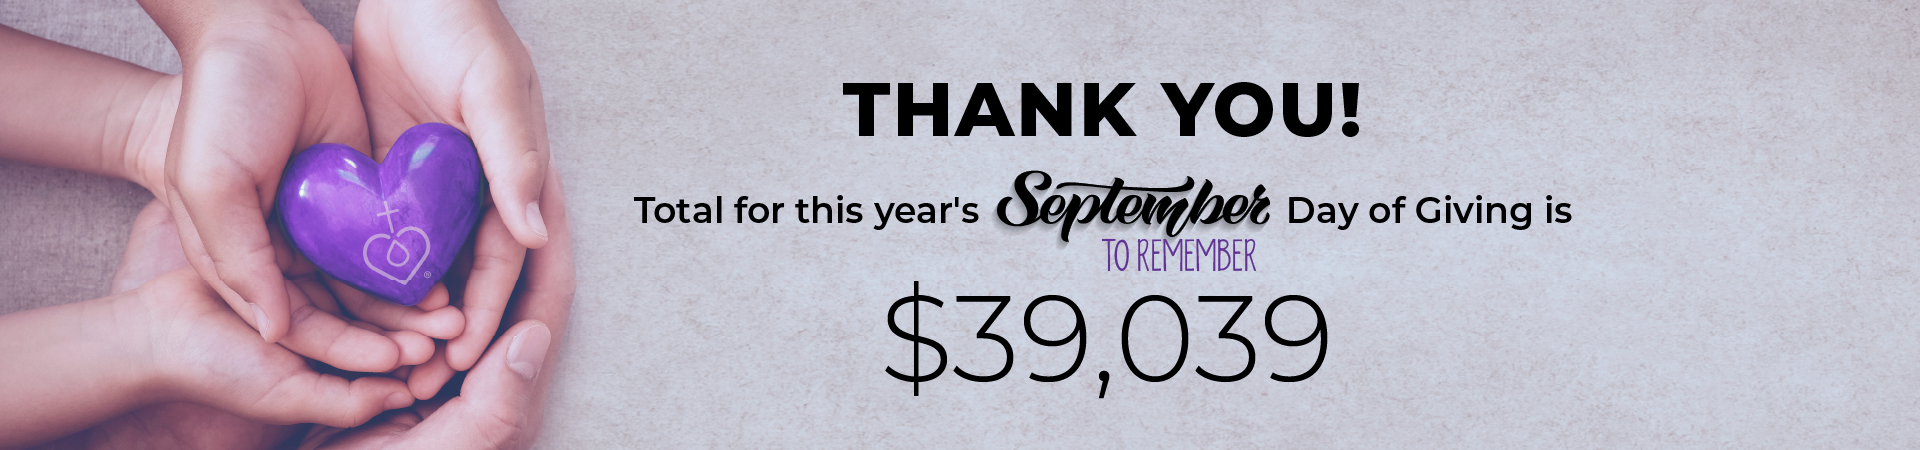 Thank you! Total for this year's September to Remember: $39,039.